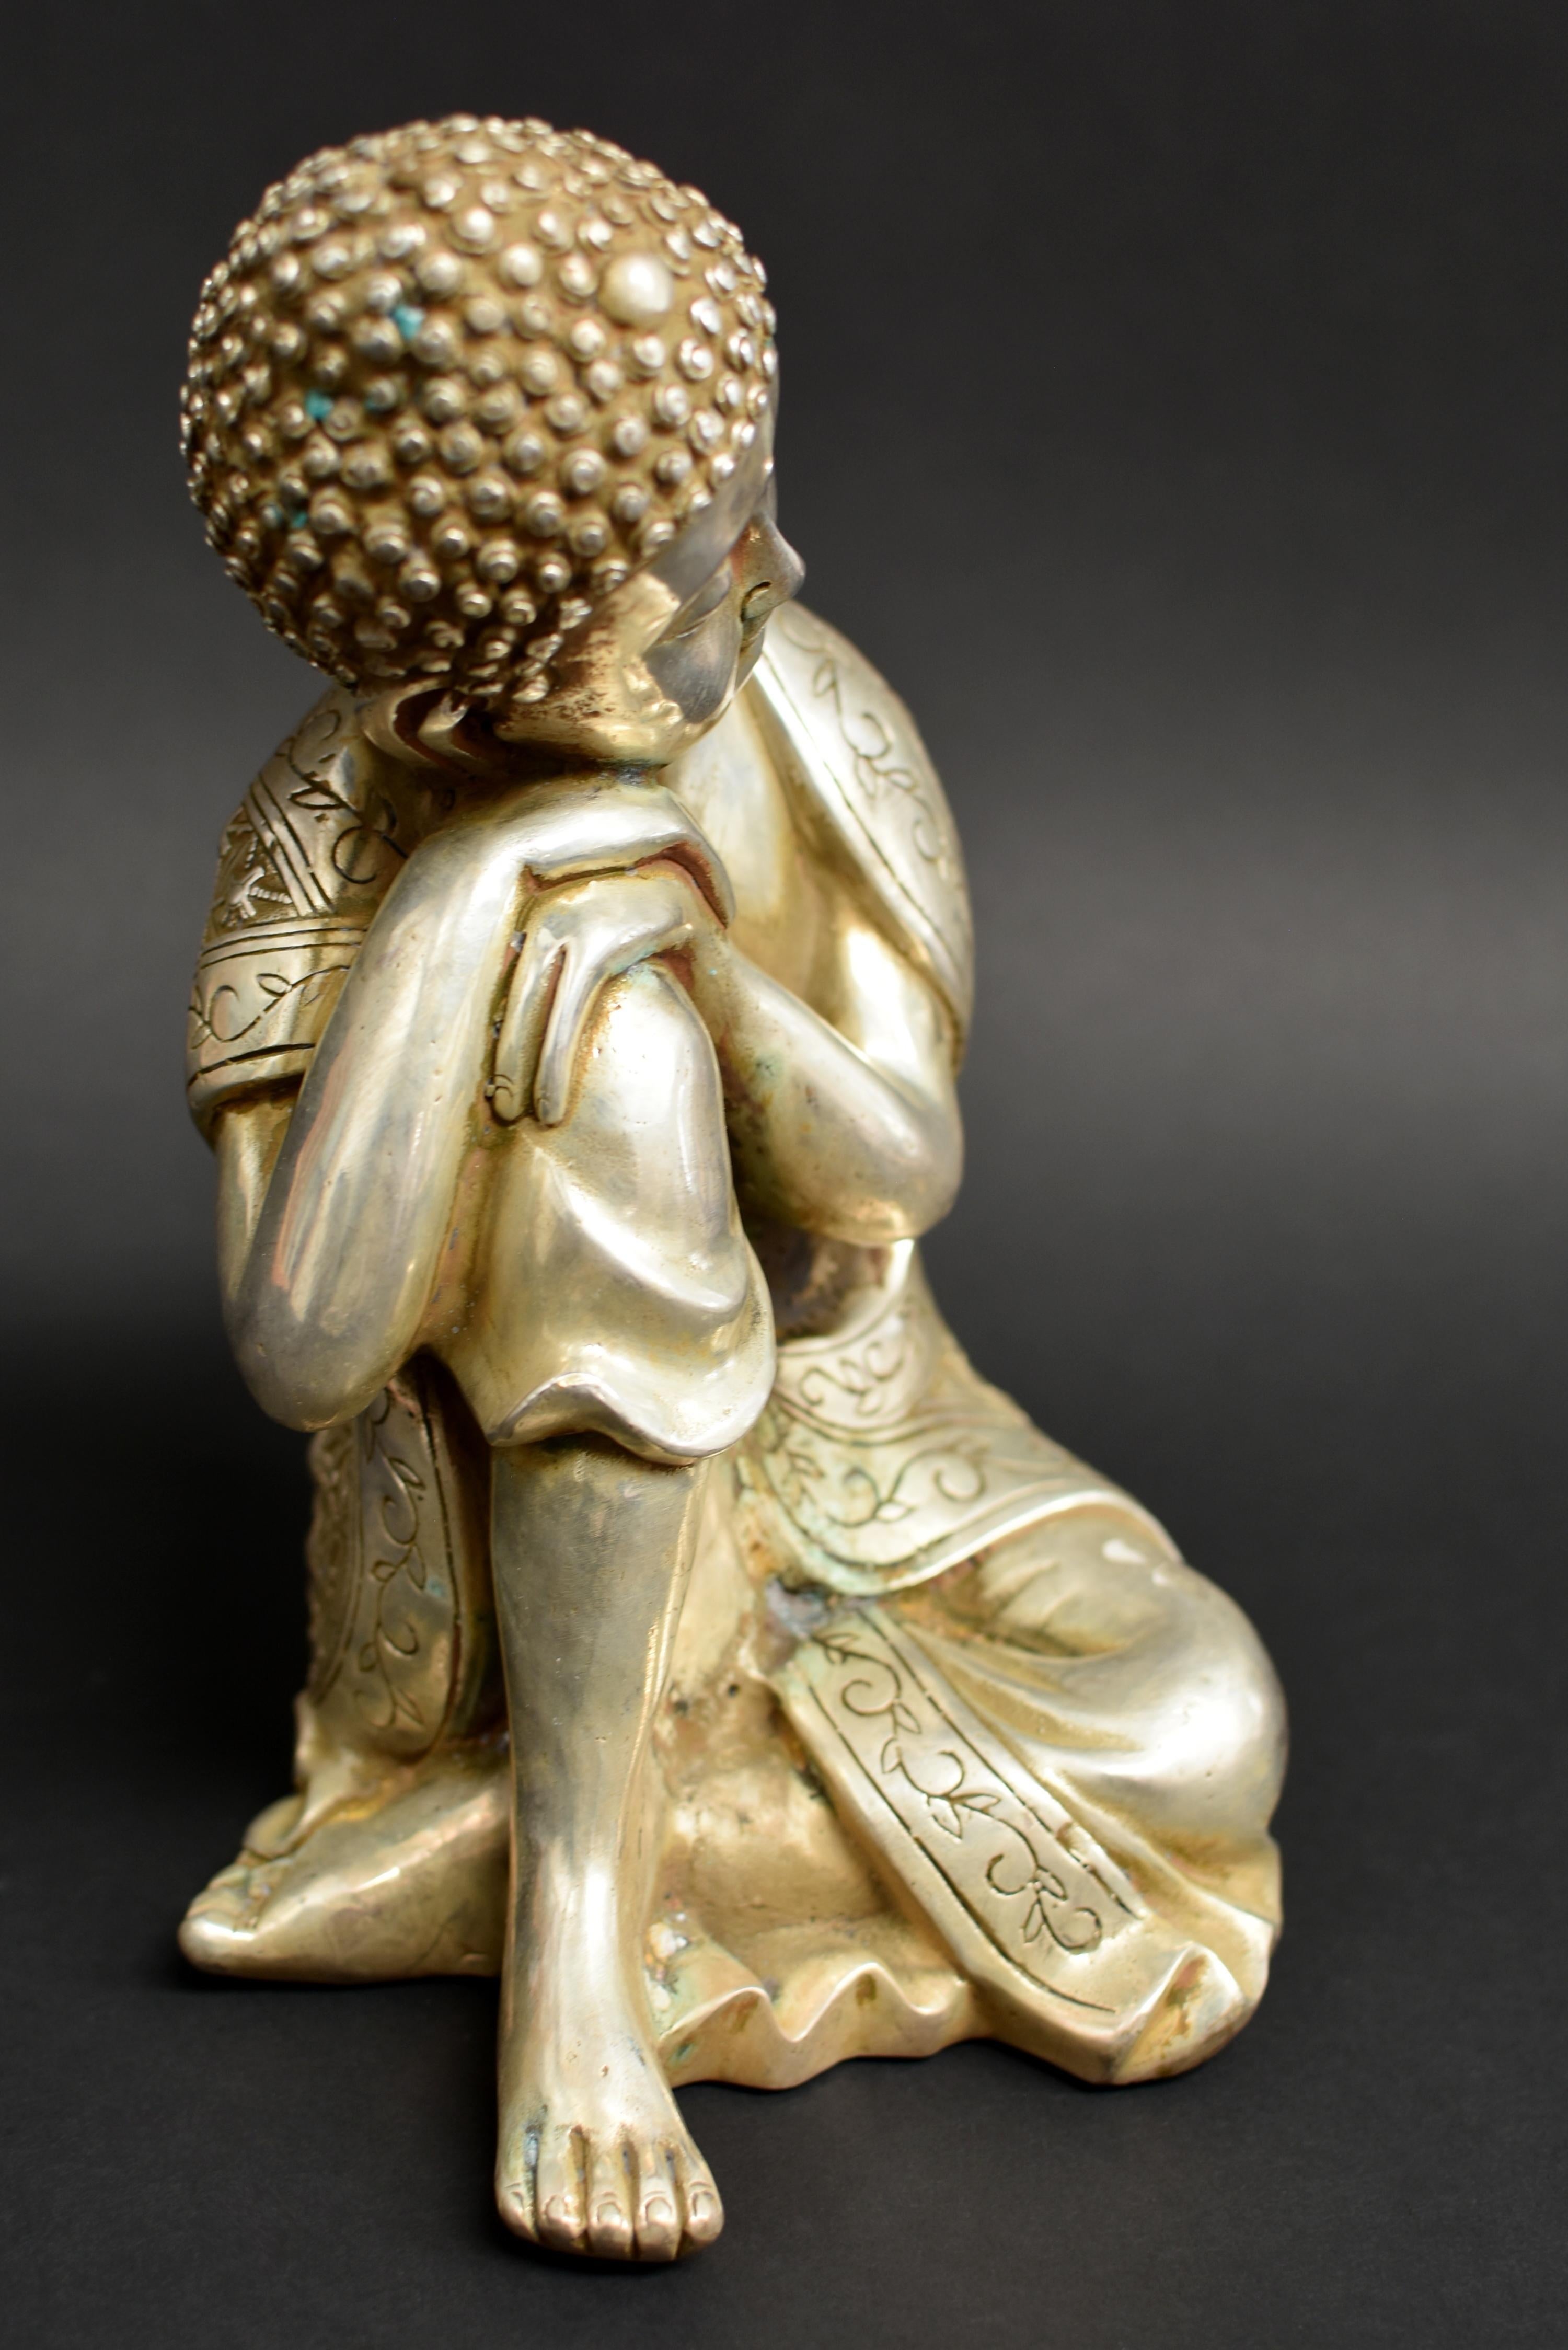 A large, beautiful statue weighing 6.4 lb depicting Buddha in contemplative, meditative mode. The broad face with closed eyes casting a serene aura, framed by long-lobed ears, beneath tightly coiled hair and surmounted by an ushnisha. Buddha wears a